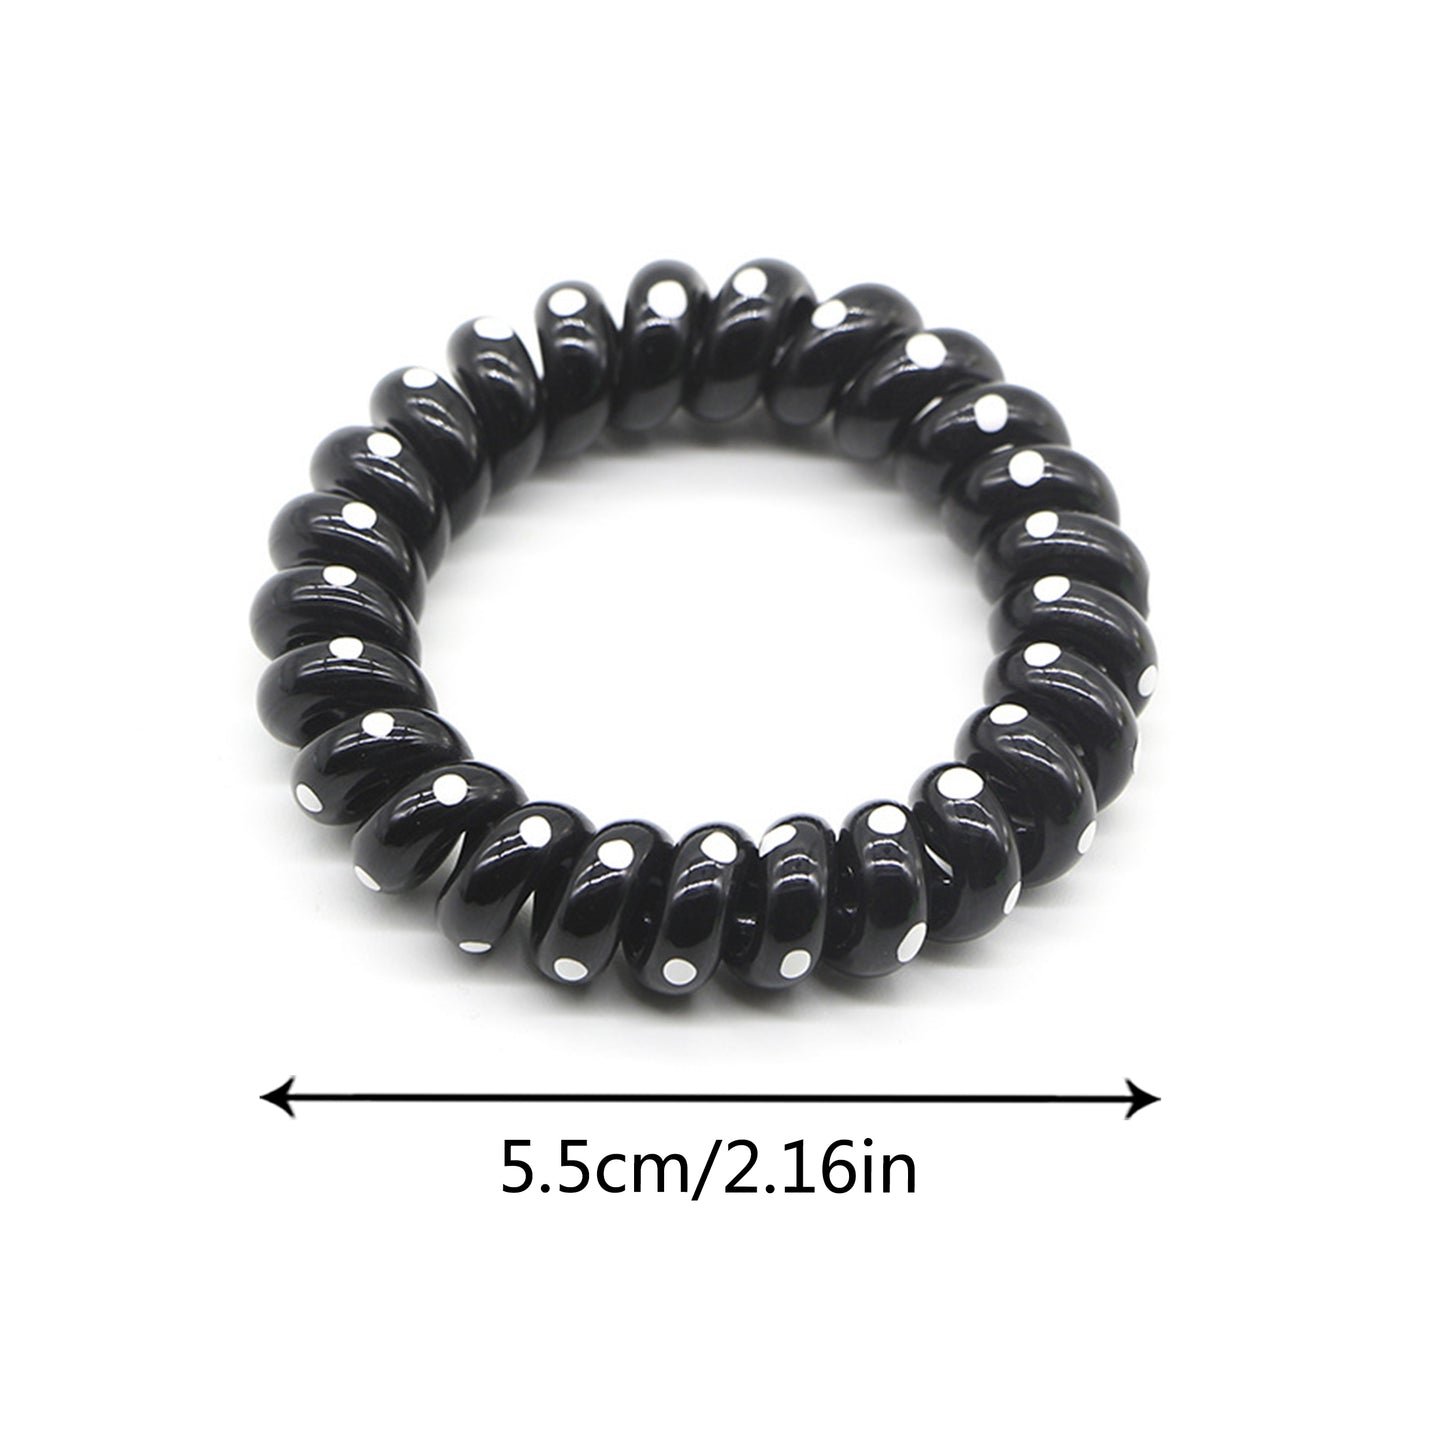 BSCI Audited Factory 5cm Mixed Colour Plastic Telephone Cord Hair Tie coil tie Holder no damage for hair